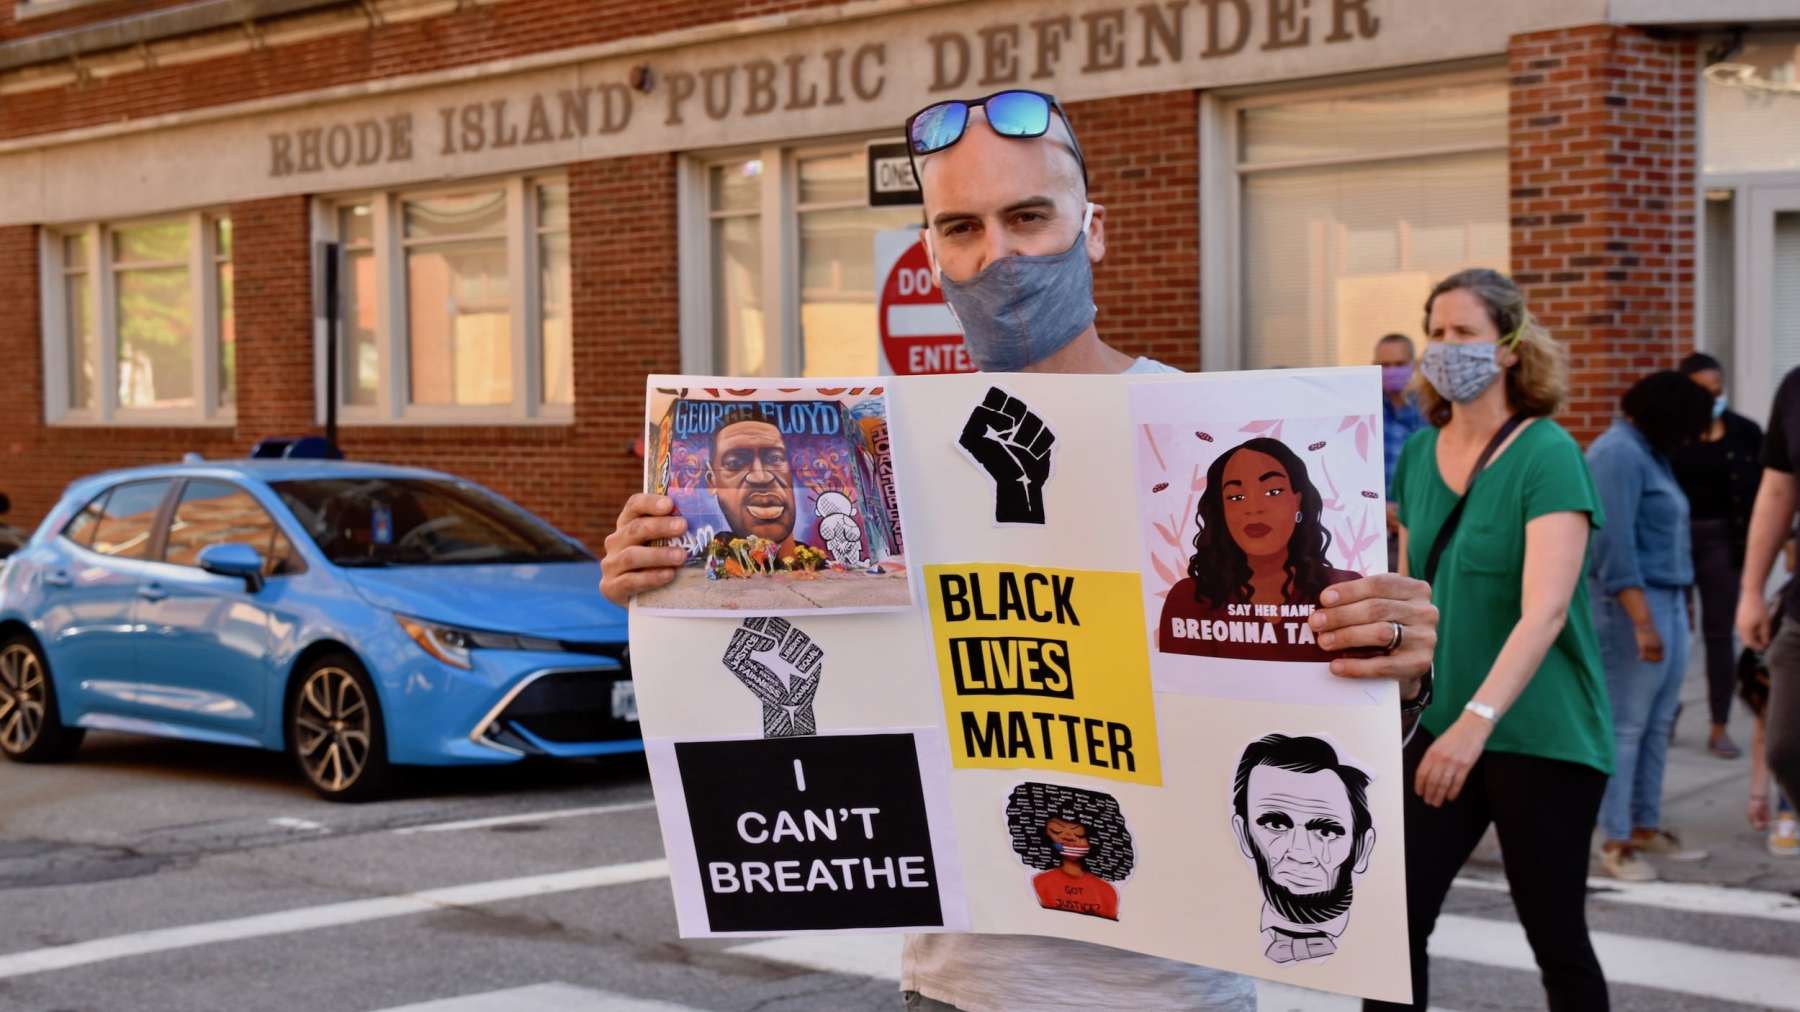 Rhode Island News: Rhode Island Public Defender’s office marches for George Floyd and Black Lives